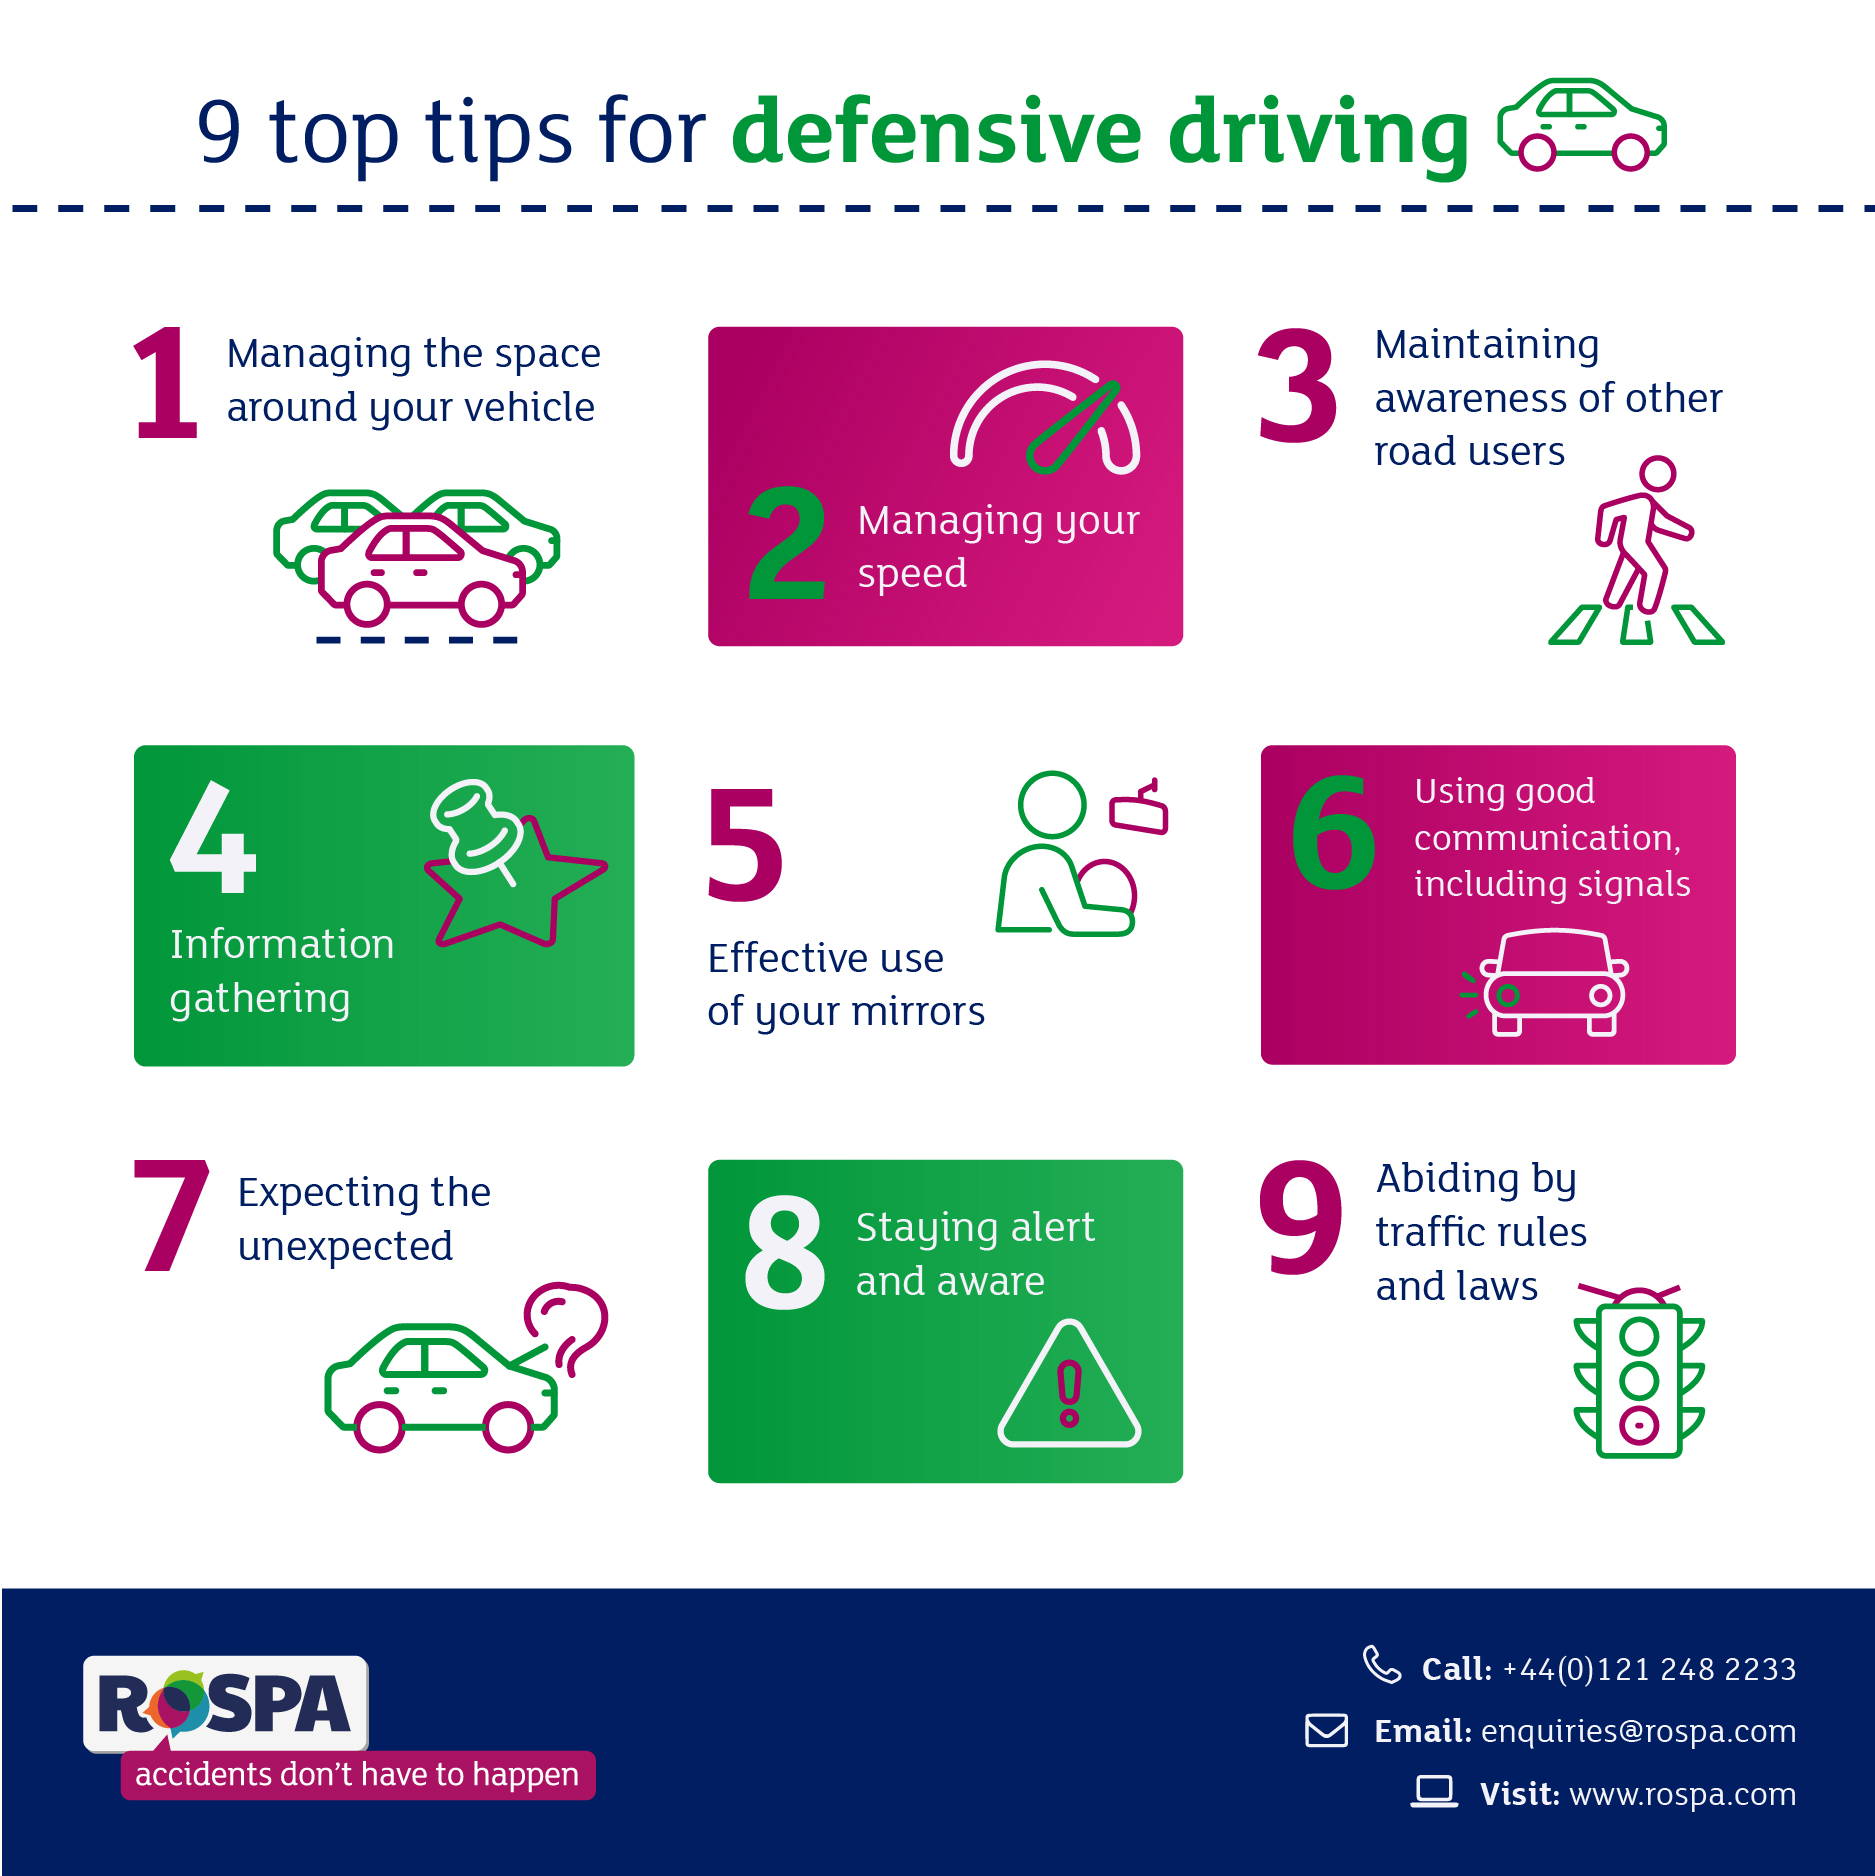 Eight Night Driving Tips for Your Safety, Driving